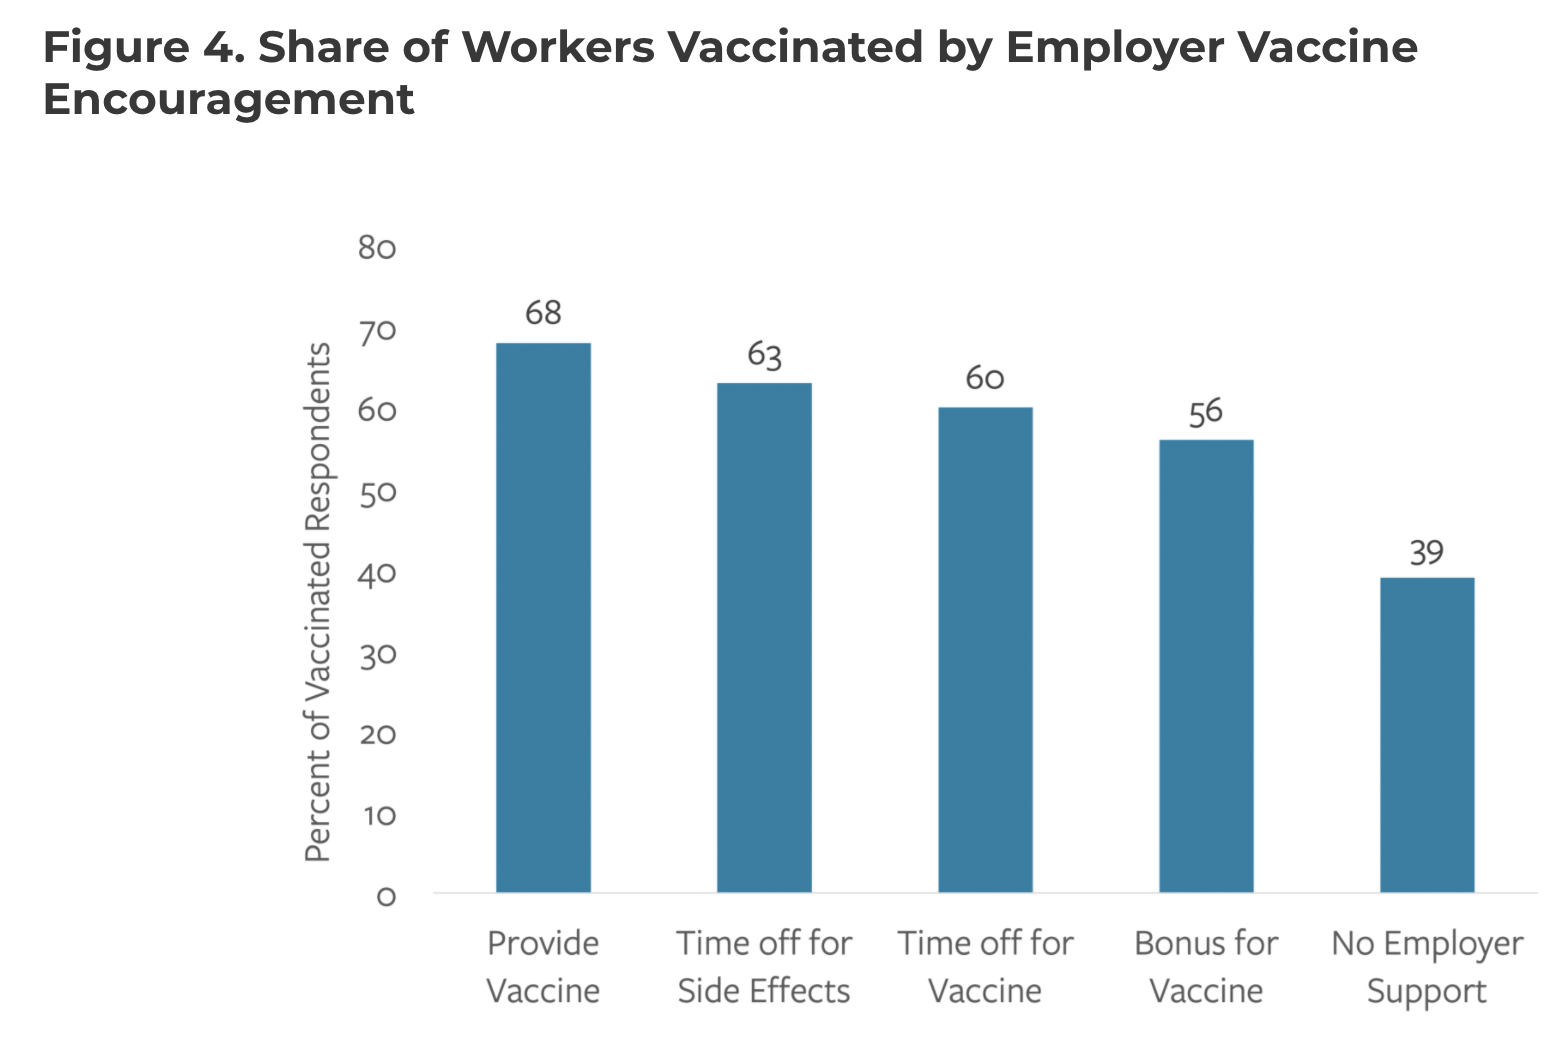 Employer support for vaccinations. Service sector workers are at the center of commercial life and staffed the front lines during the worst days of the Covid-19 pandemic. Understanding the barriers holding service workers back from accessing vaccines now is crucial for ensuring their protection and for securing a national recovery from the Covid-19 pandemic.